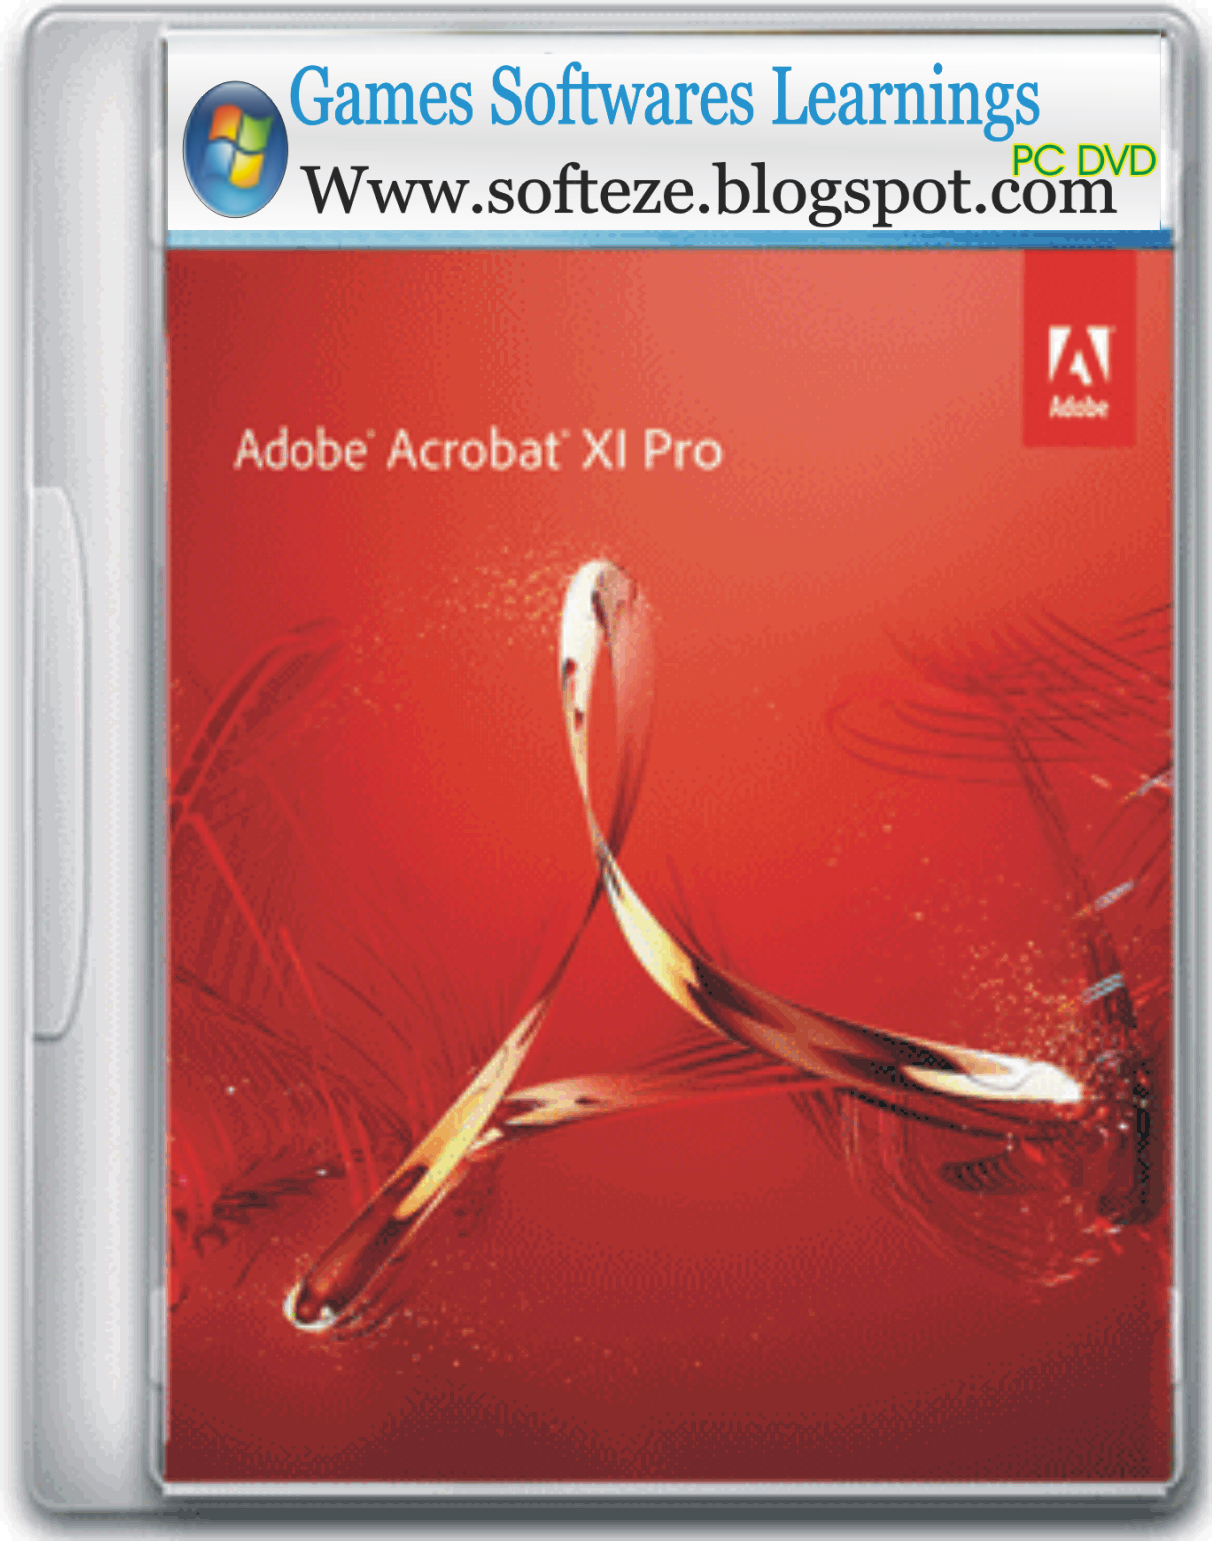 Download and install Adobe Acrobat Pro DC trial